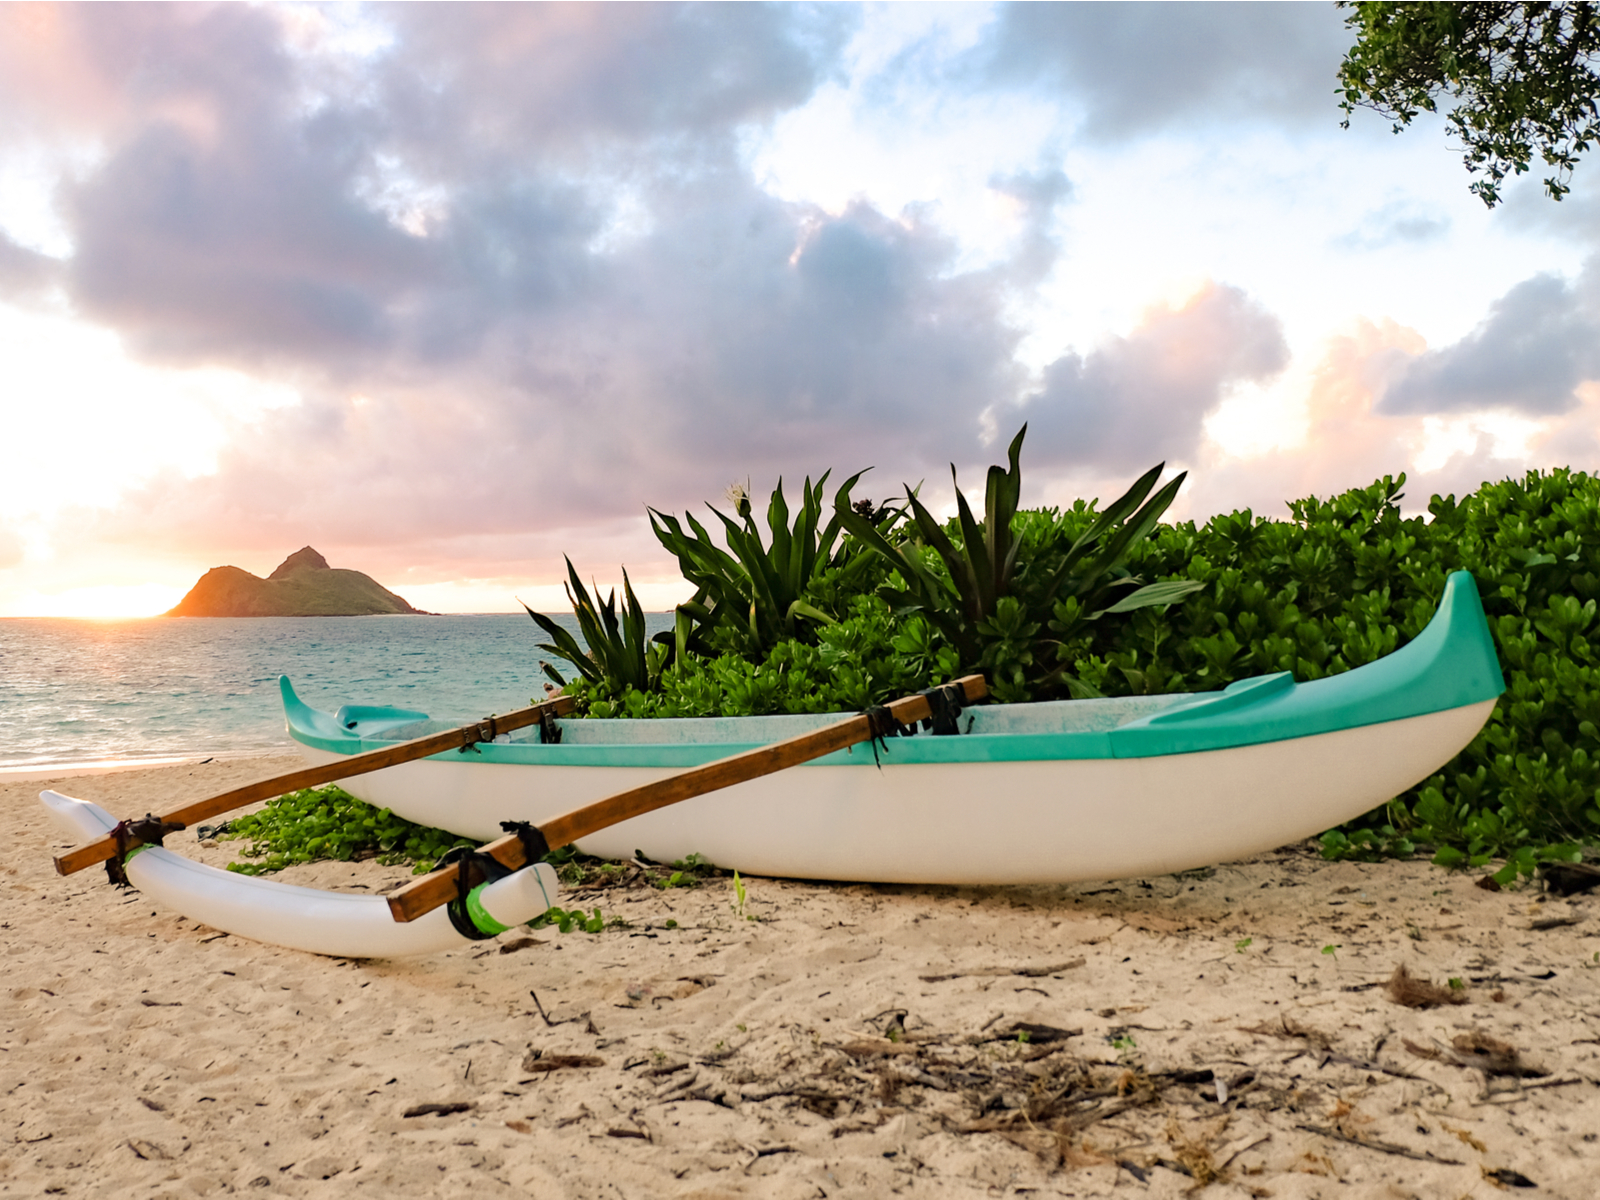 Canoe resting on a tropical beach during sunset during the least busy time to visit Oahu